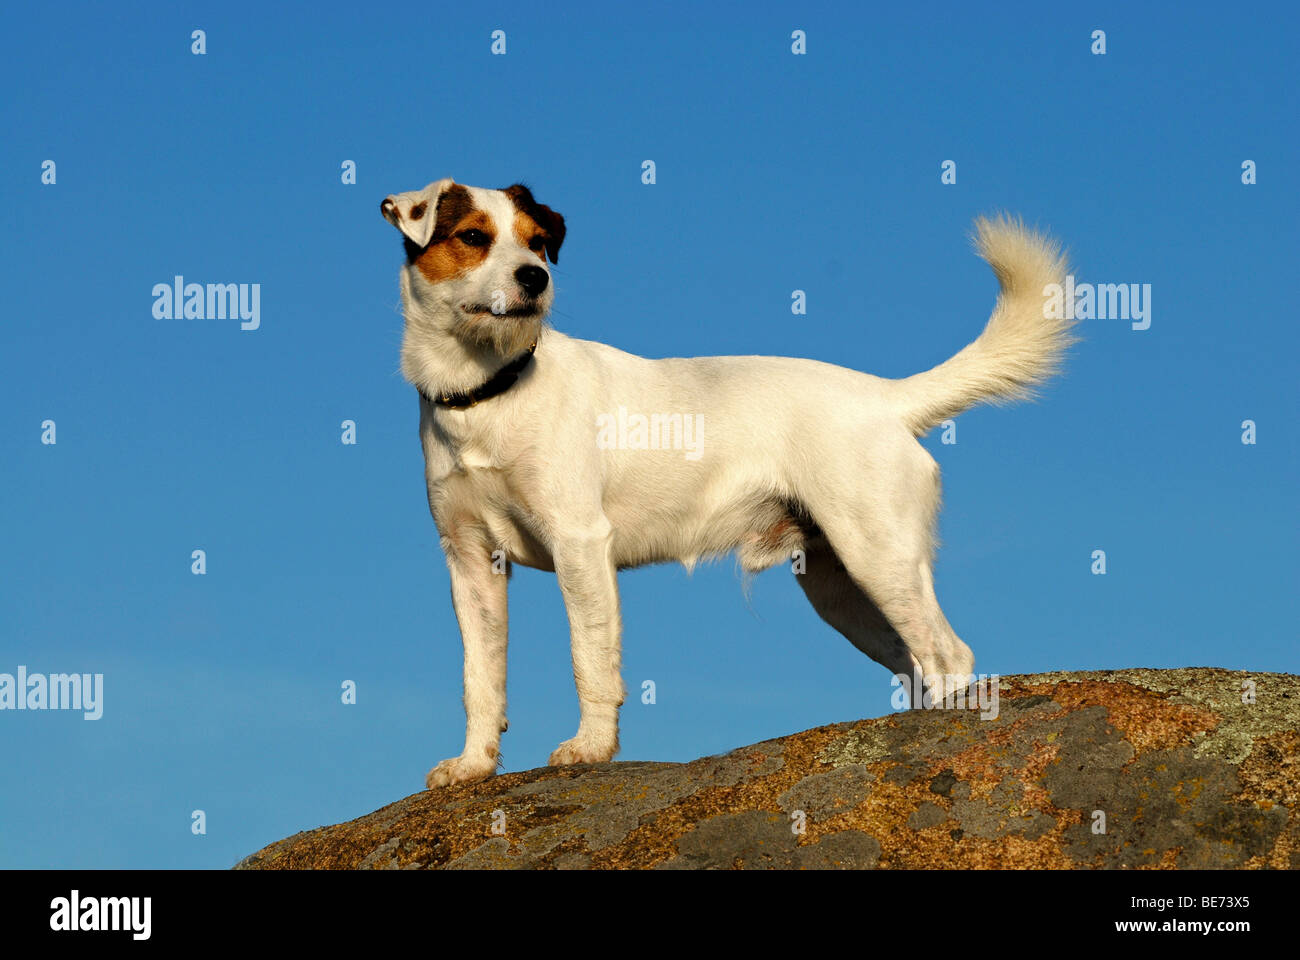 Parson Jack Russell Terrier, standing Stock Photo